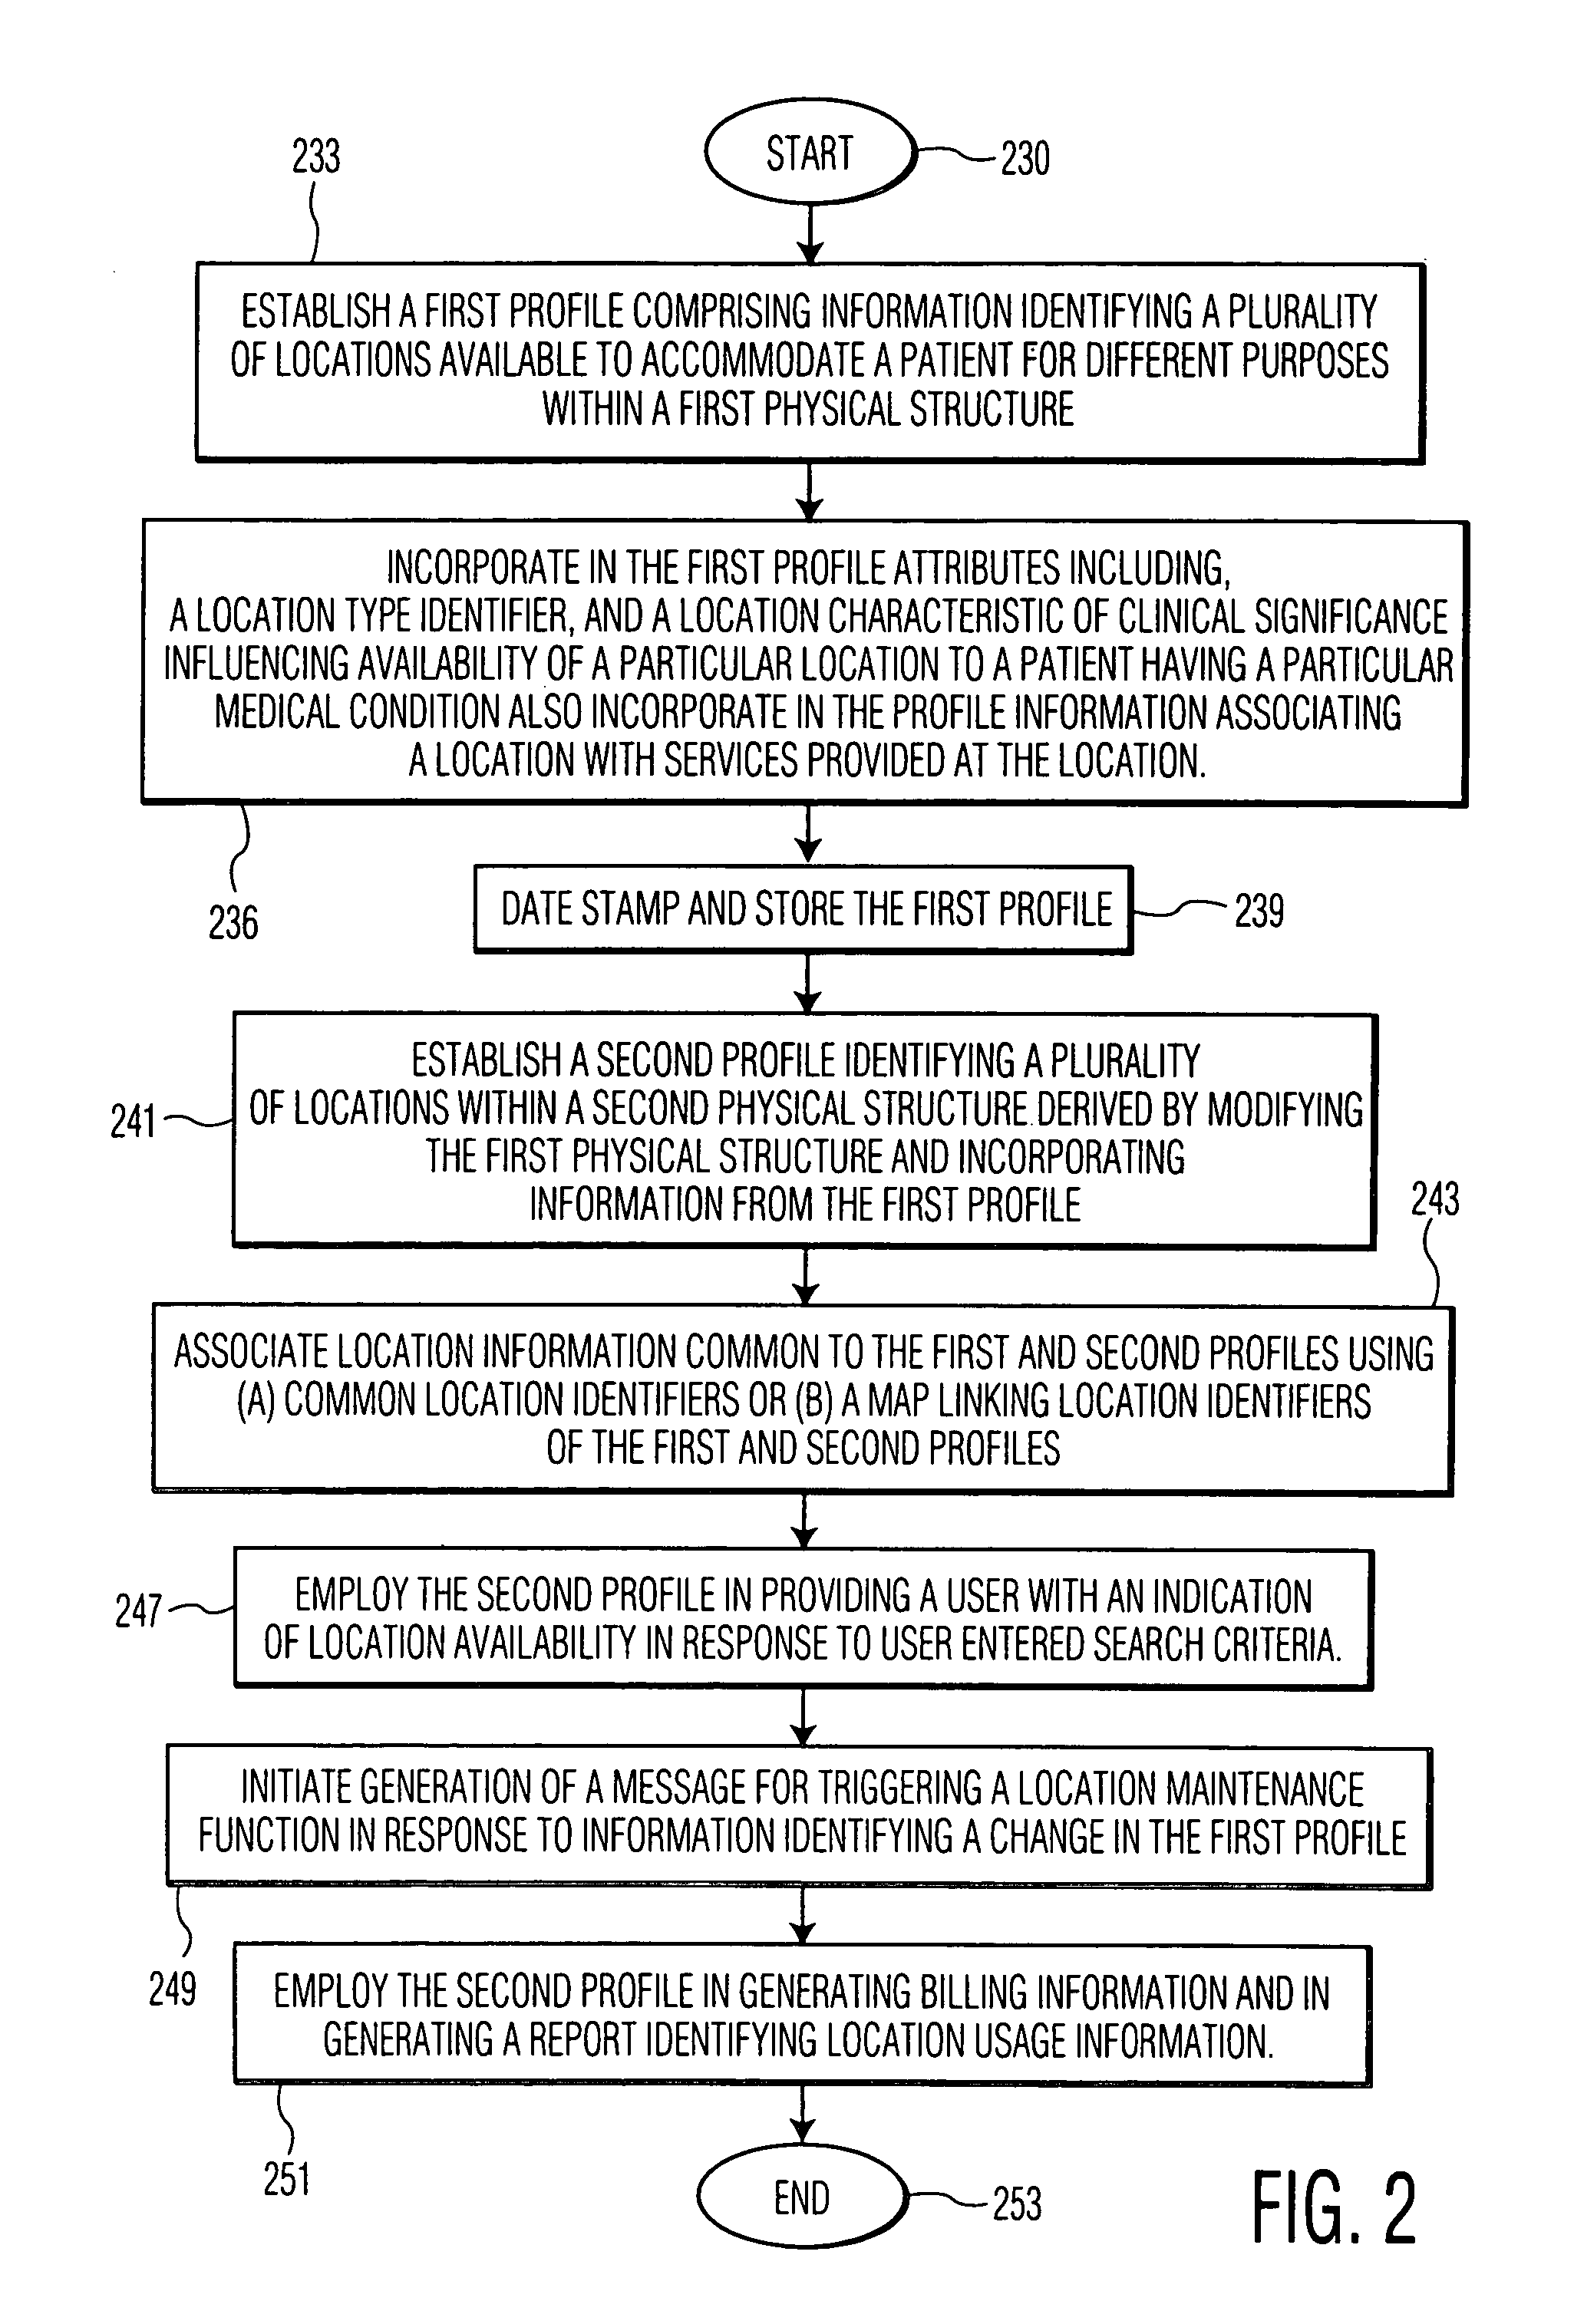 Resource monitoring system for processing location related information in a healthcare enterprise